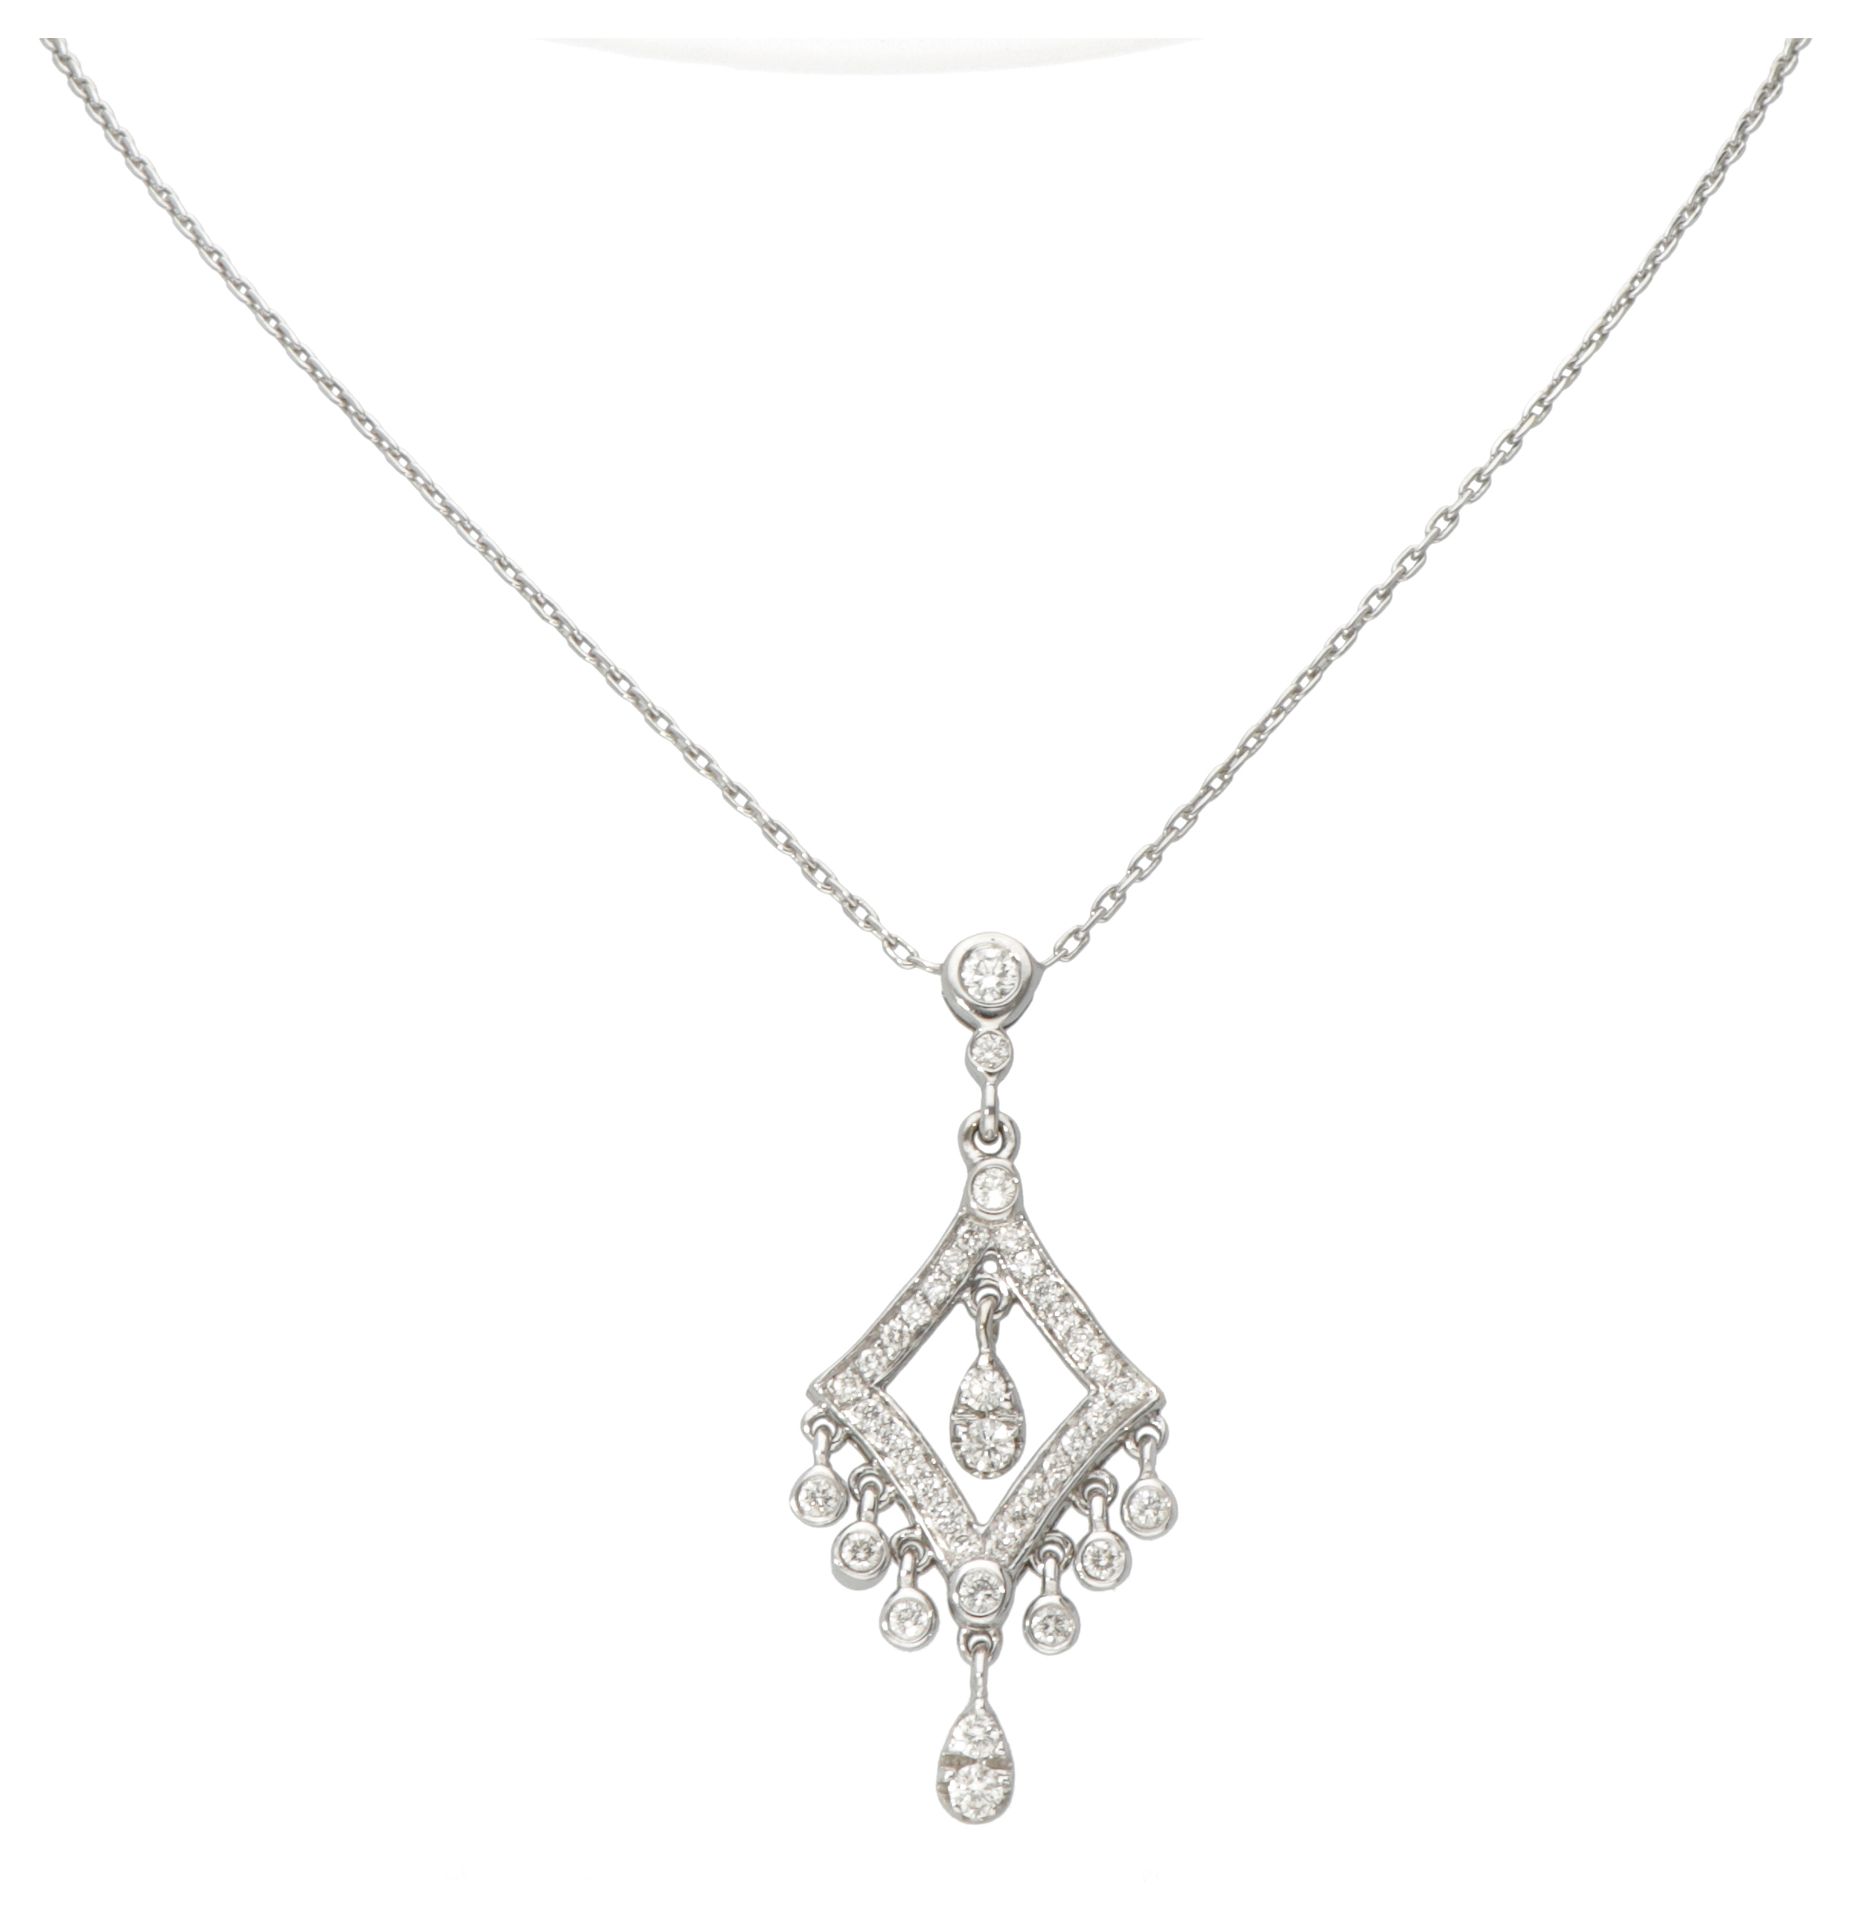 18K. White gold necklace and pendant set with approx. 0.62 ct. Diamond. Hallmark&hellip;